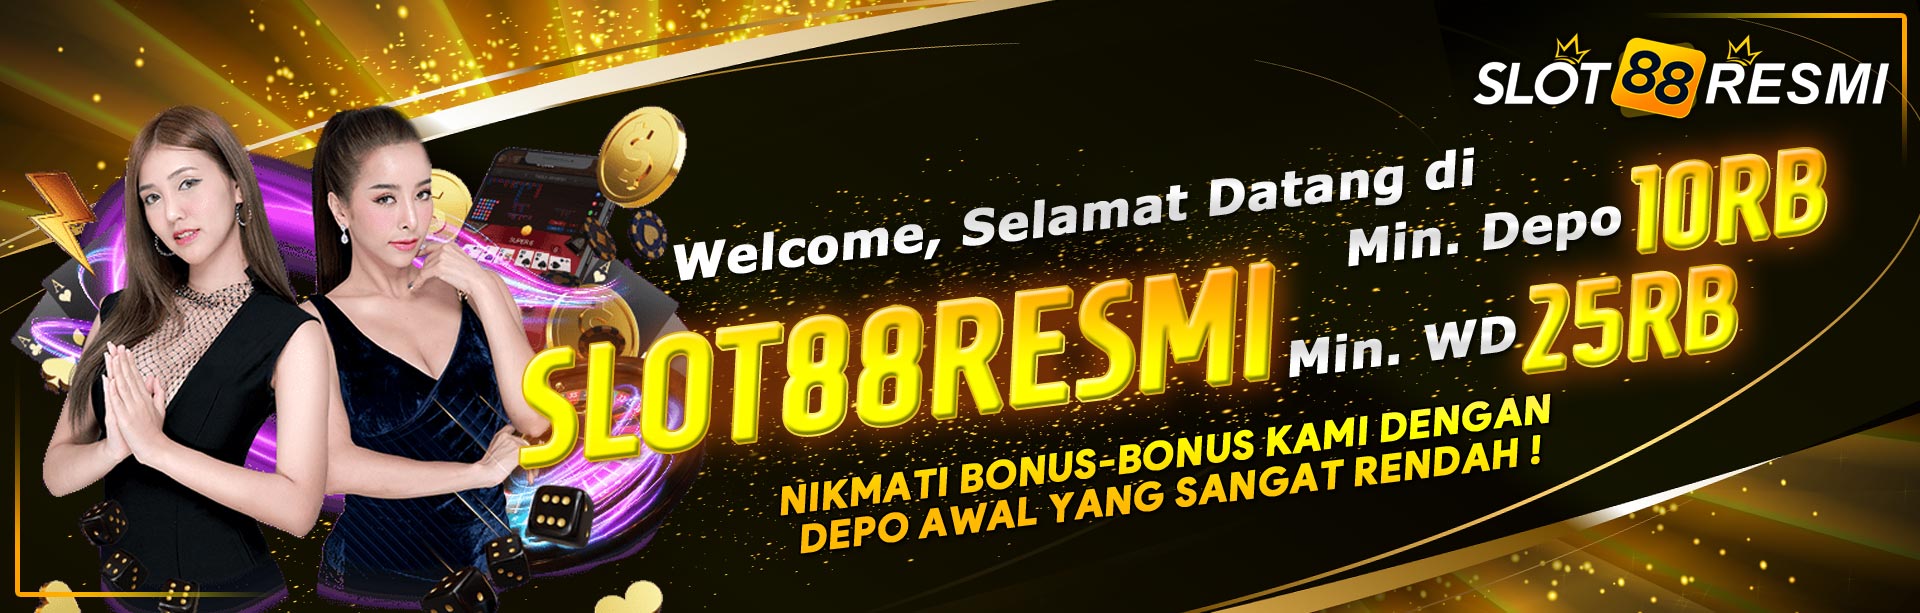 WELCOME TO SLOT88RESMI